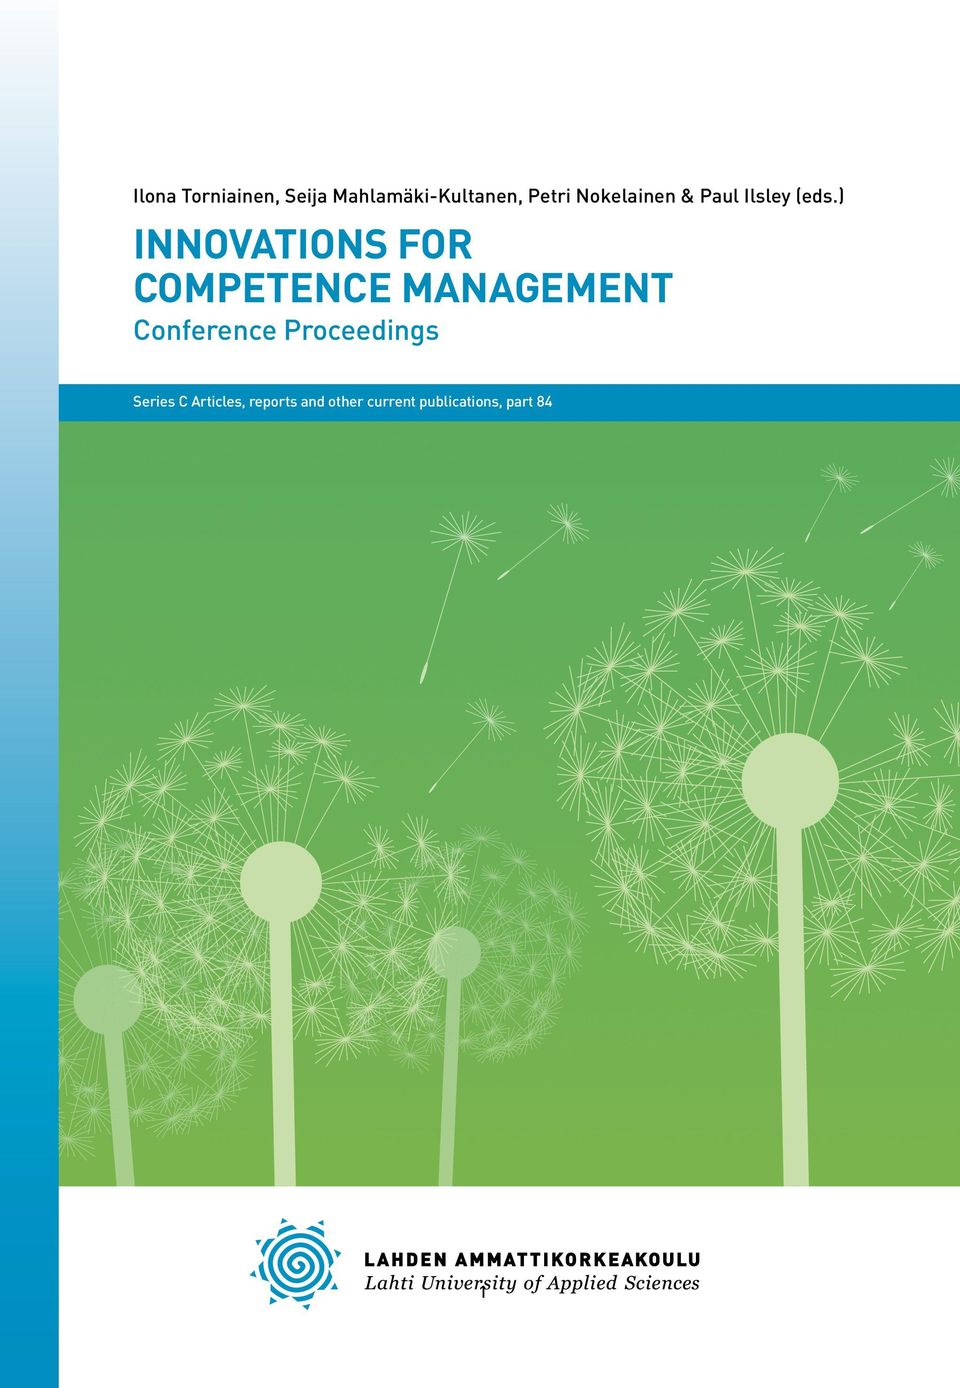 ) INNOVATIONS FOR COMPETENCE MANAGEMENT Conference